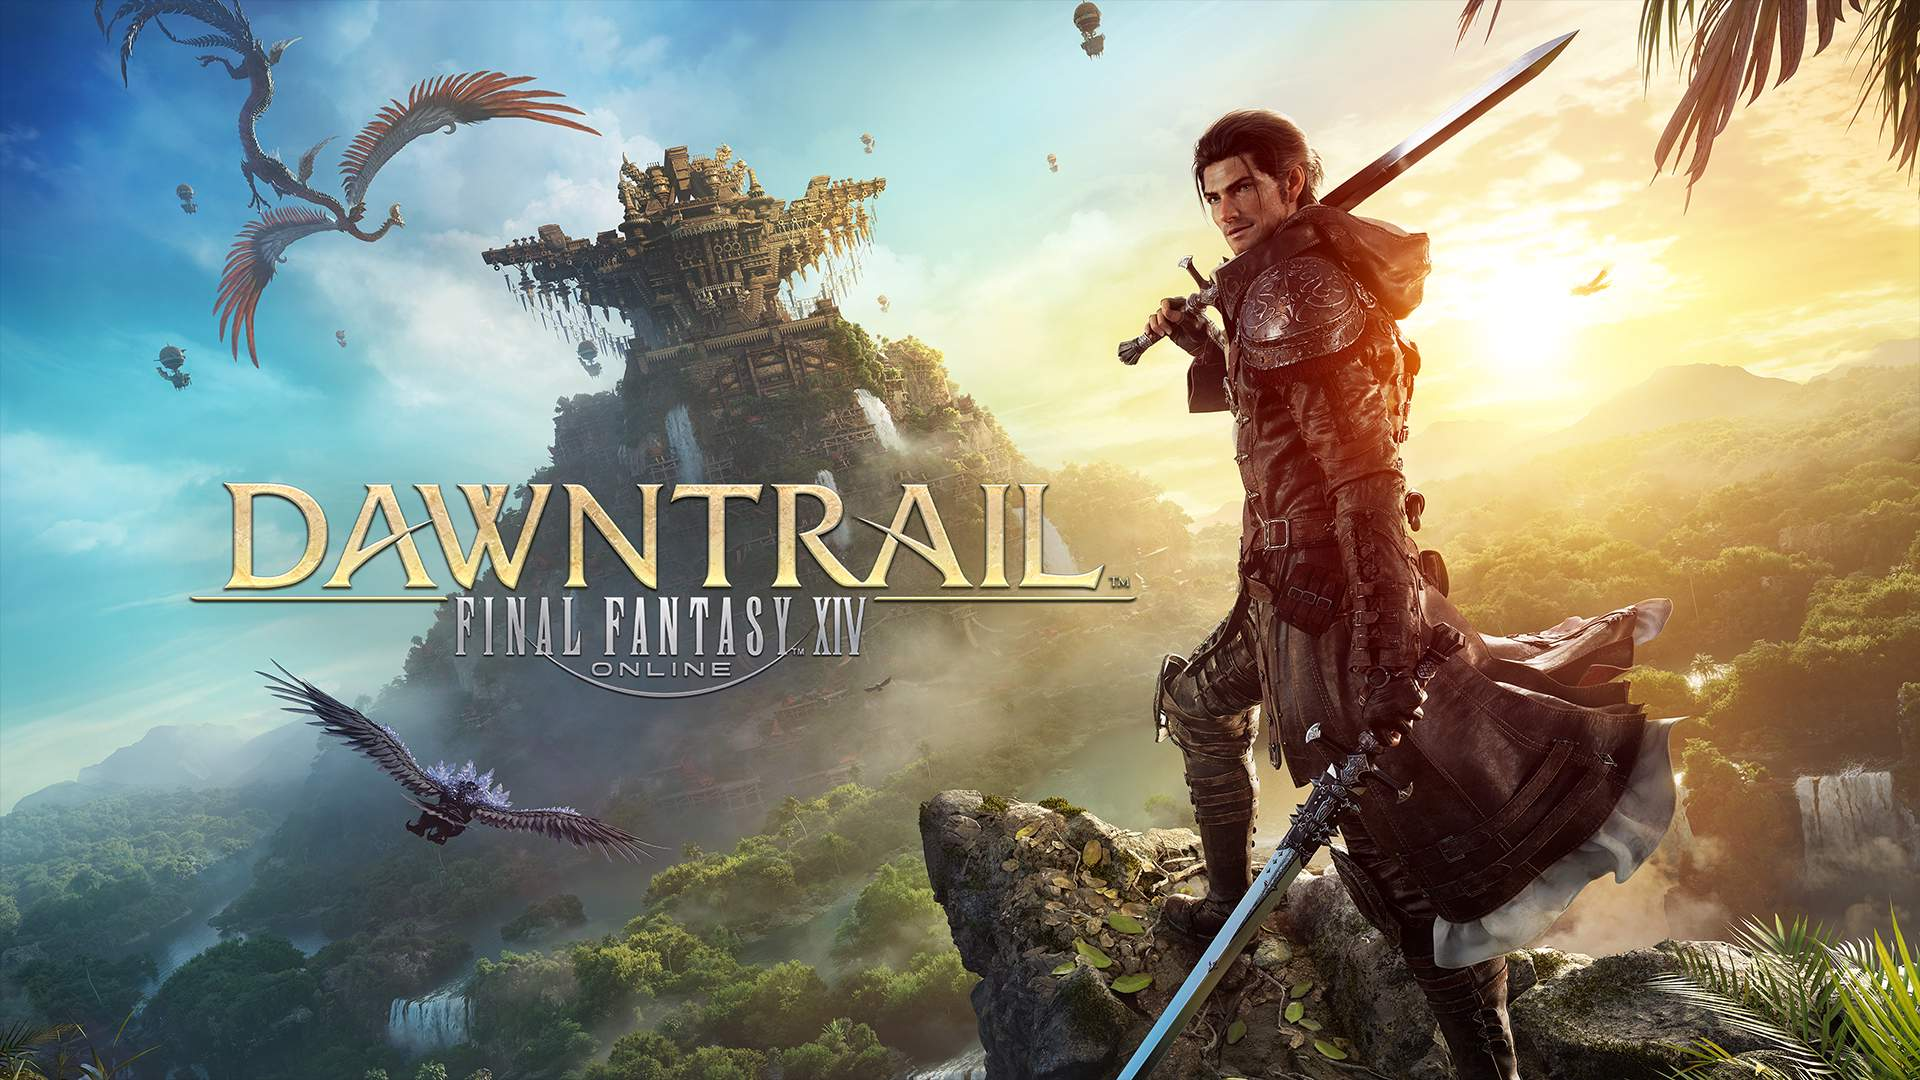 Final Fantasy XIV: Dawntrail Official Benchmark Software Released Showcasing Graphical Update